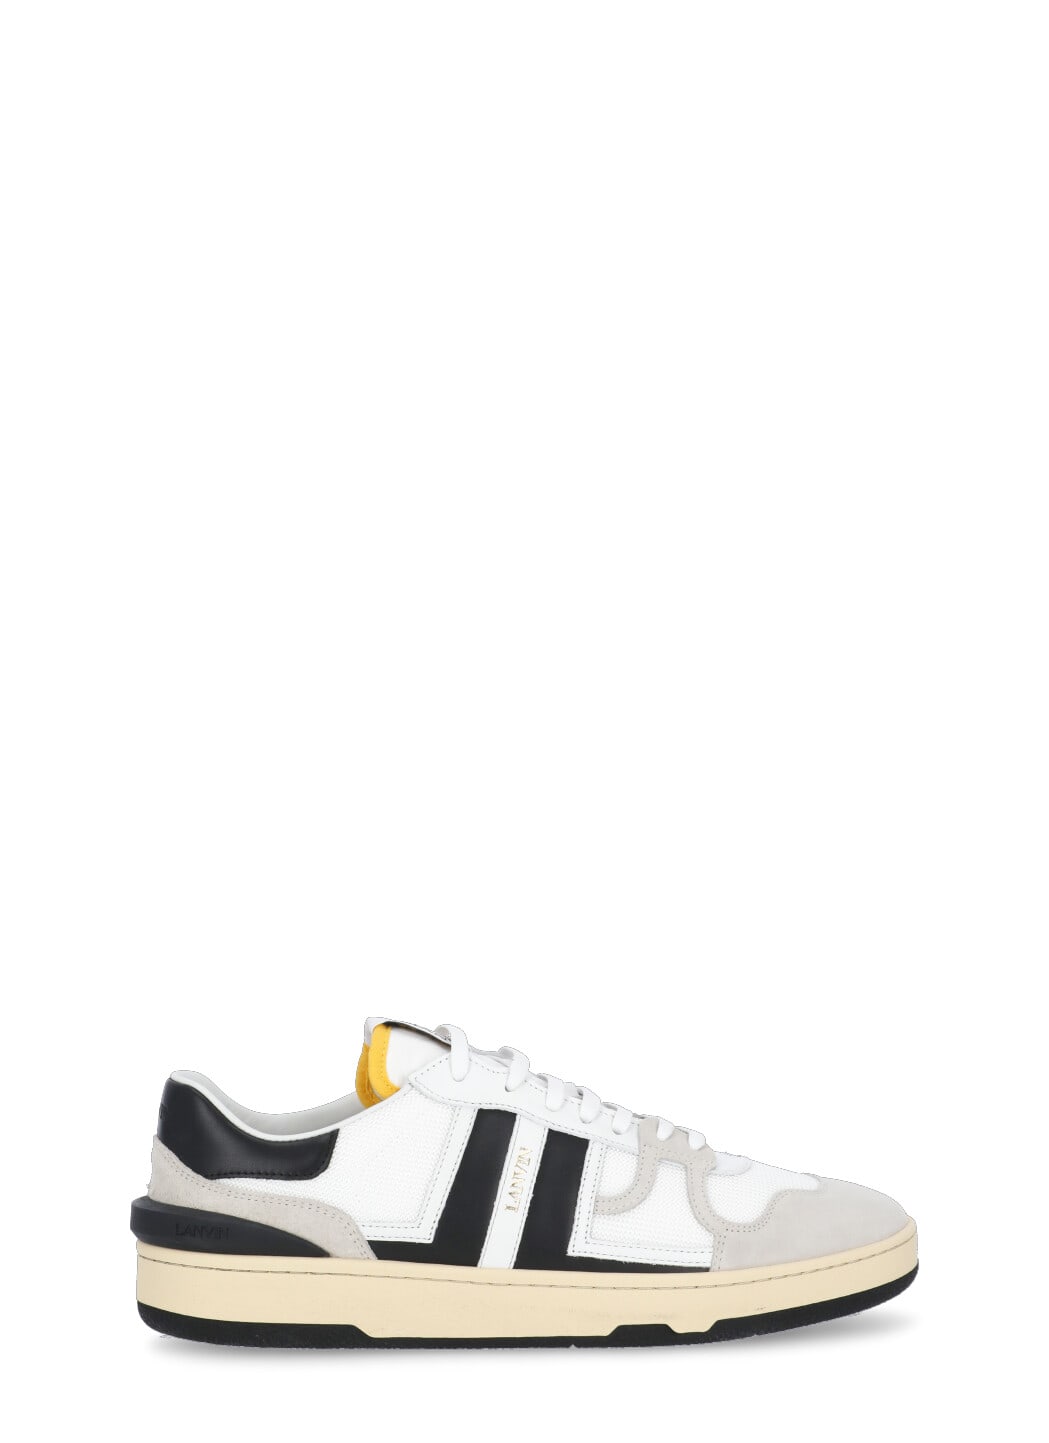 Shop Lanvin Clay Sneakers In White